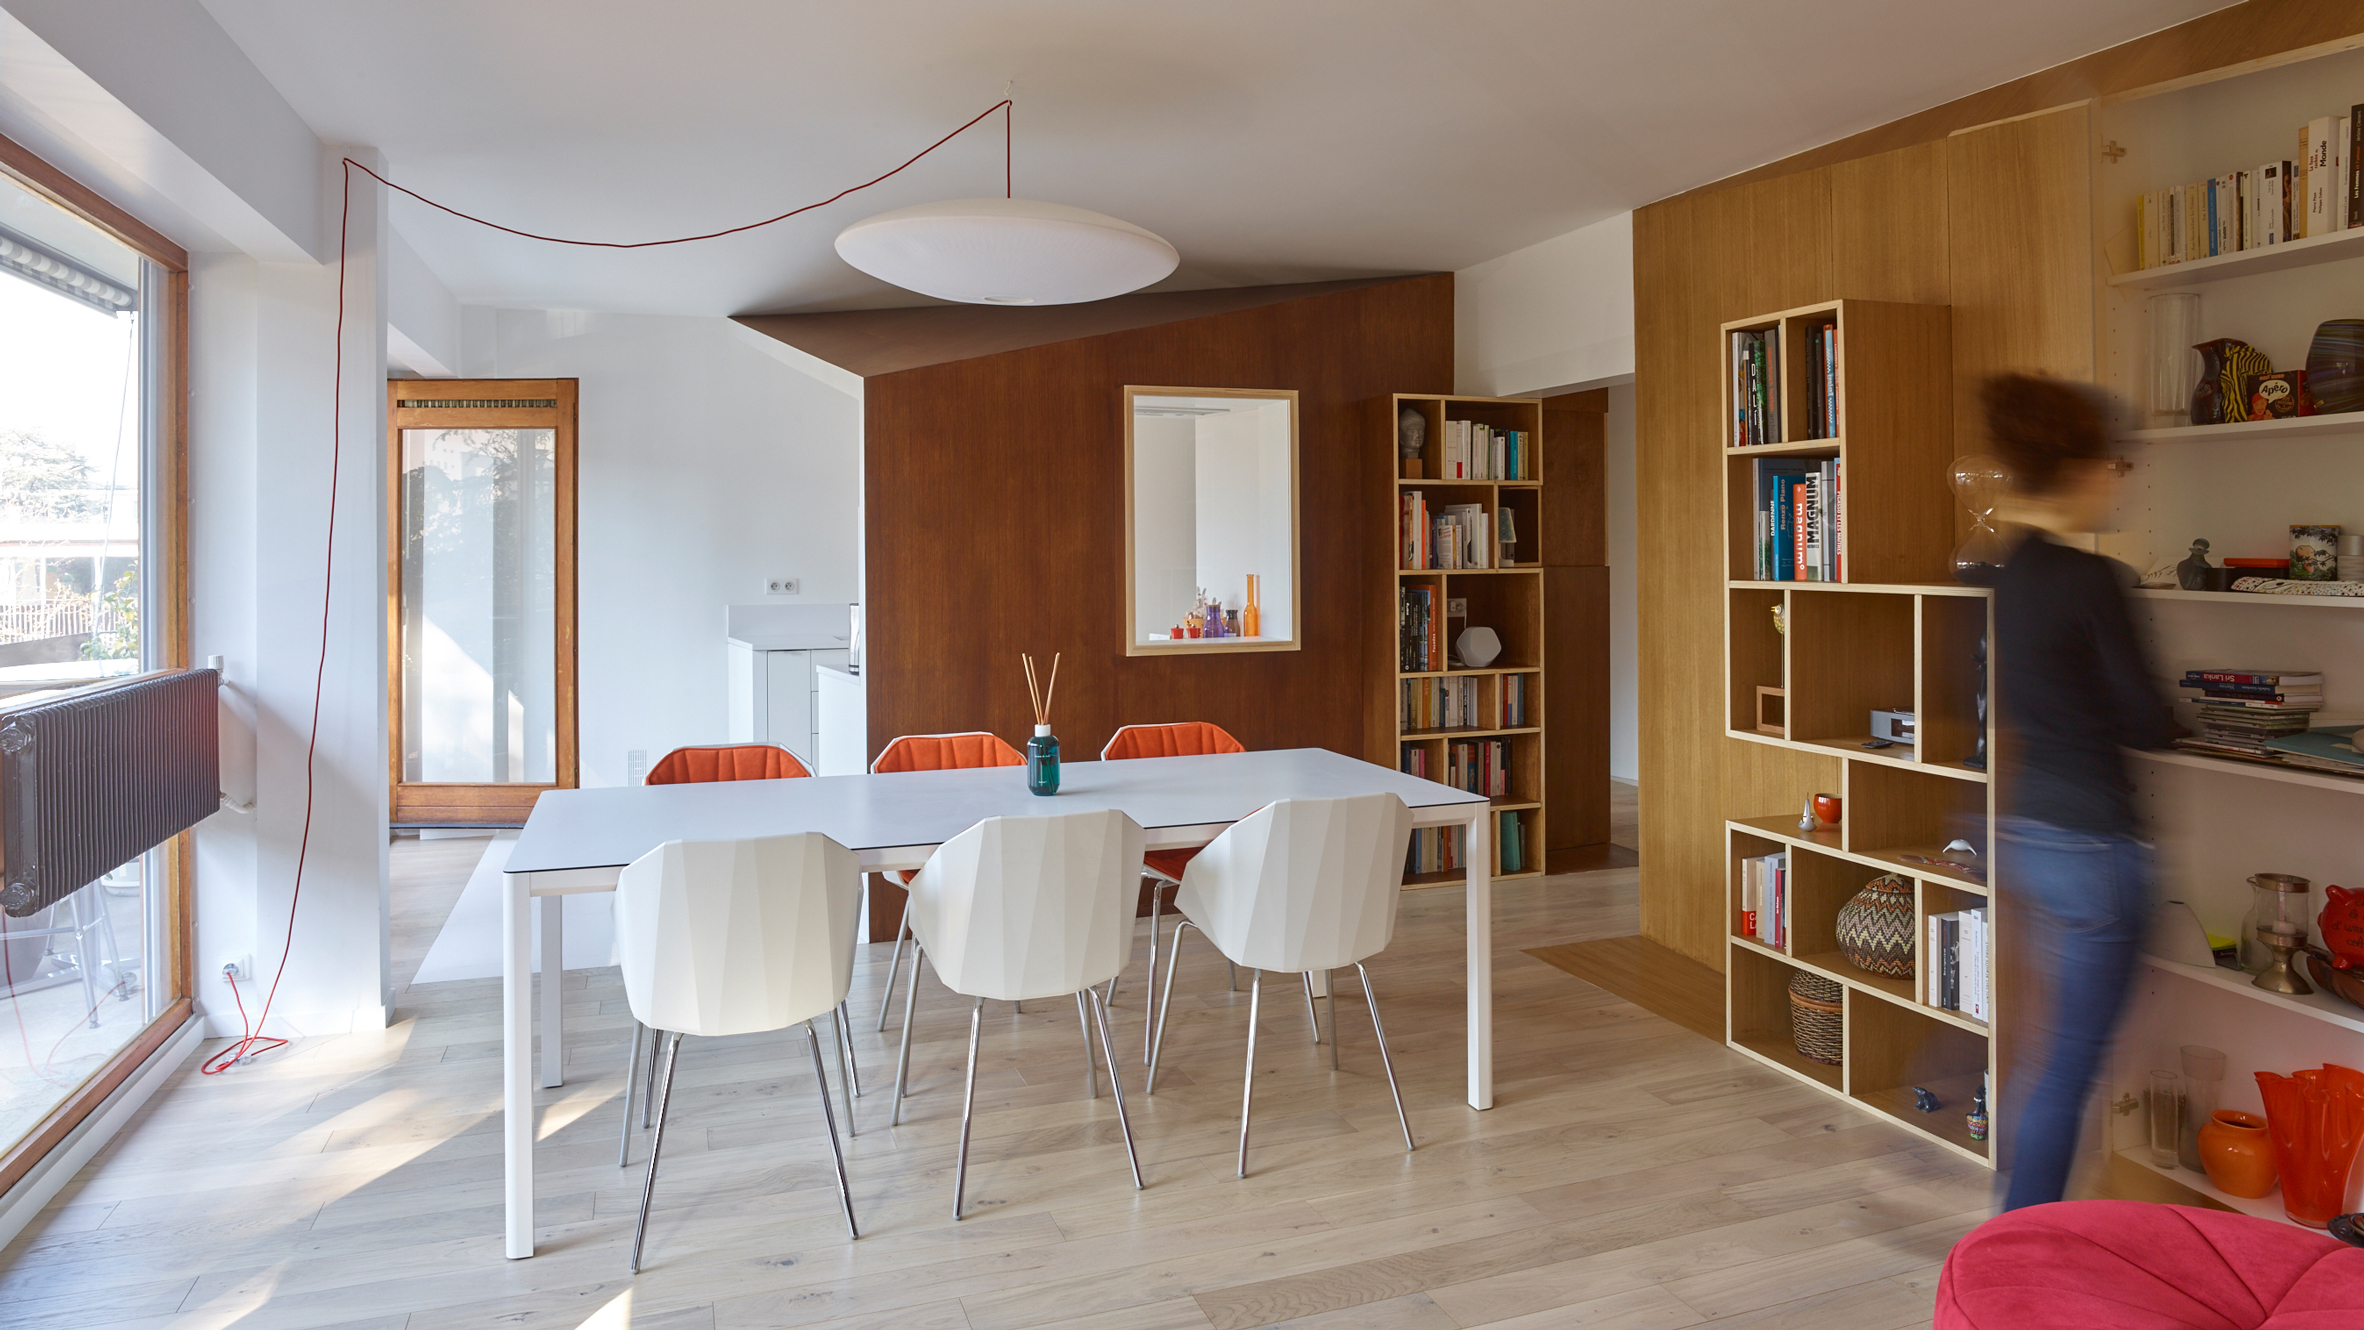 Clutter concealed within wooden walls inside French apartment